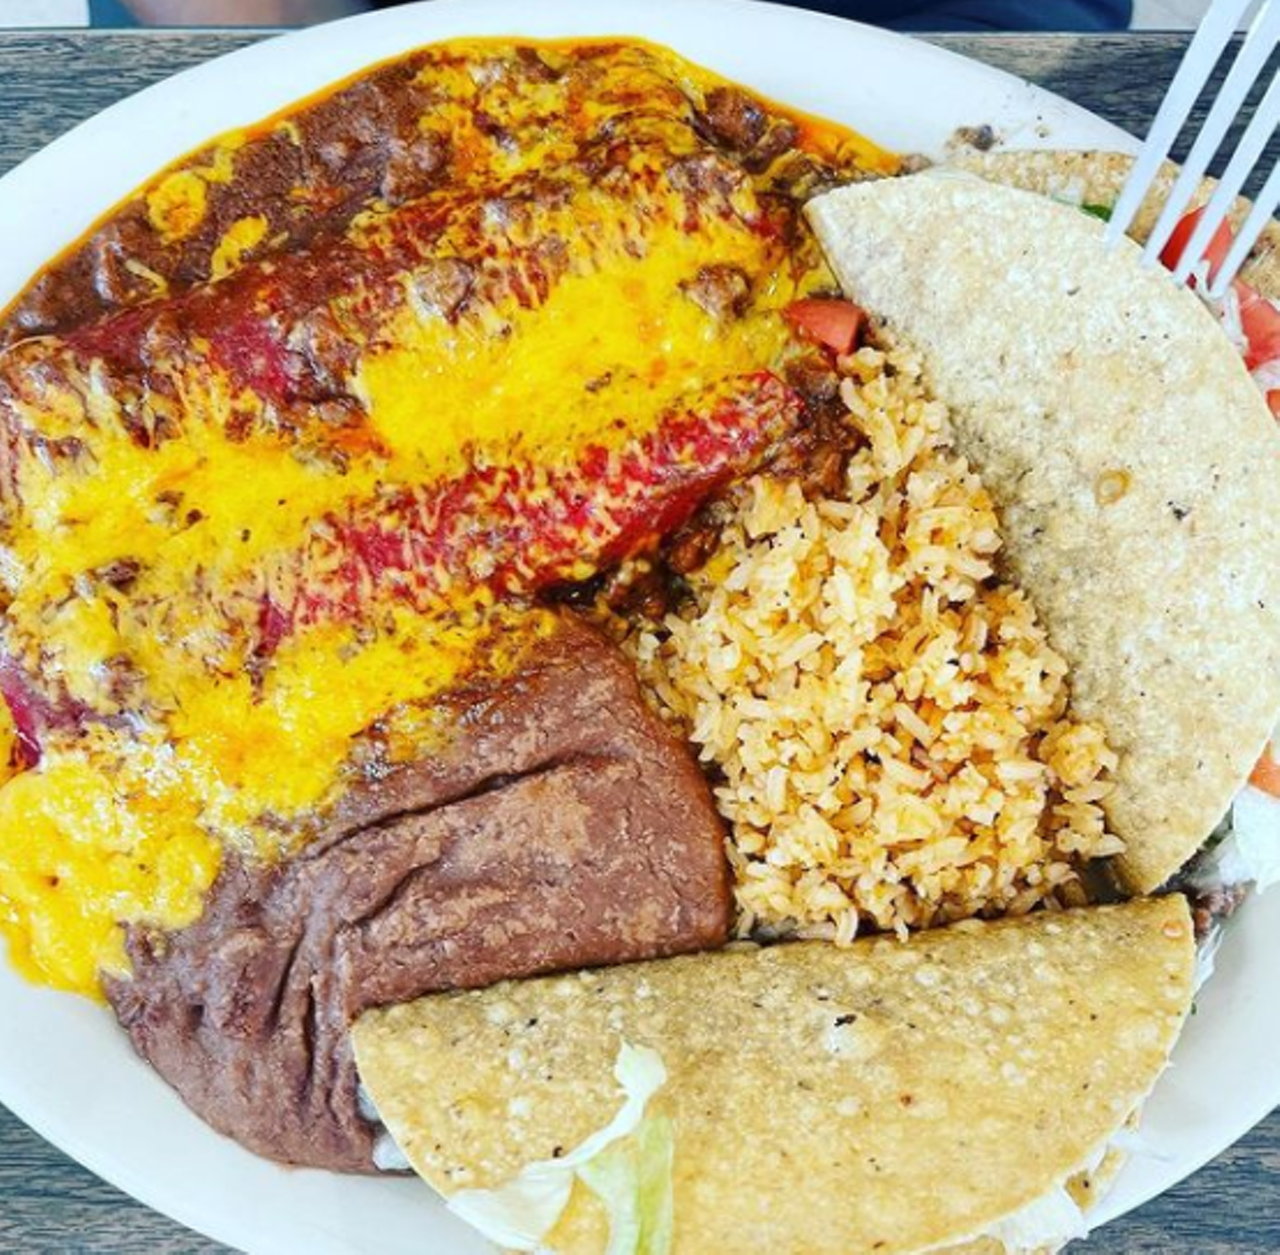 Garcia’s Mexican Food
842 Fredericksburg Rd, (210) 735-5686, facebook.com/Garcias-Mexican-Food
In search of Mexican comfort food? Look no further than Garcia’s, whose enchiladas and fideo loco are sure to hit the spot.
Photo via Instagram /  eatdrinkandberichard